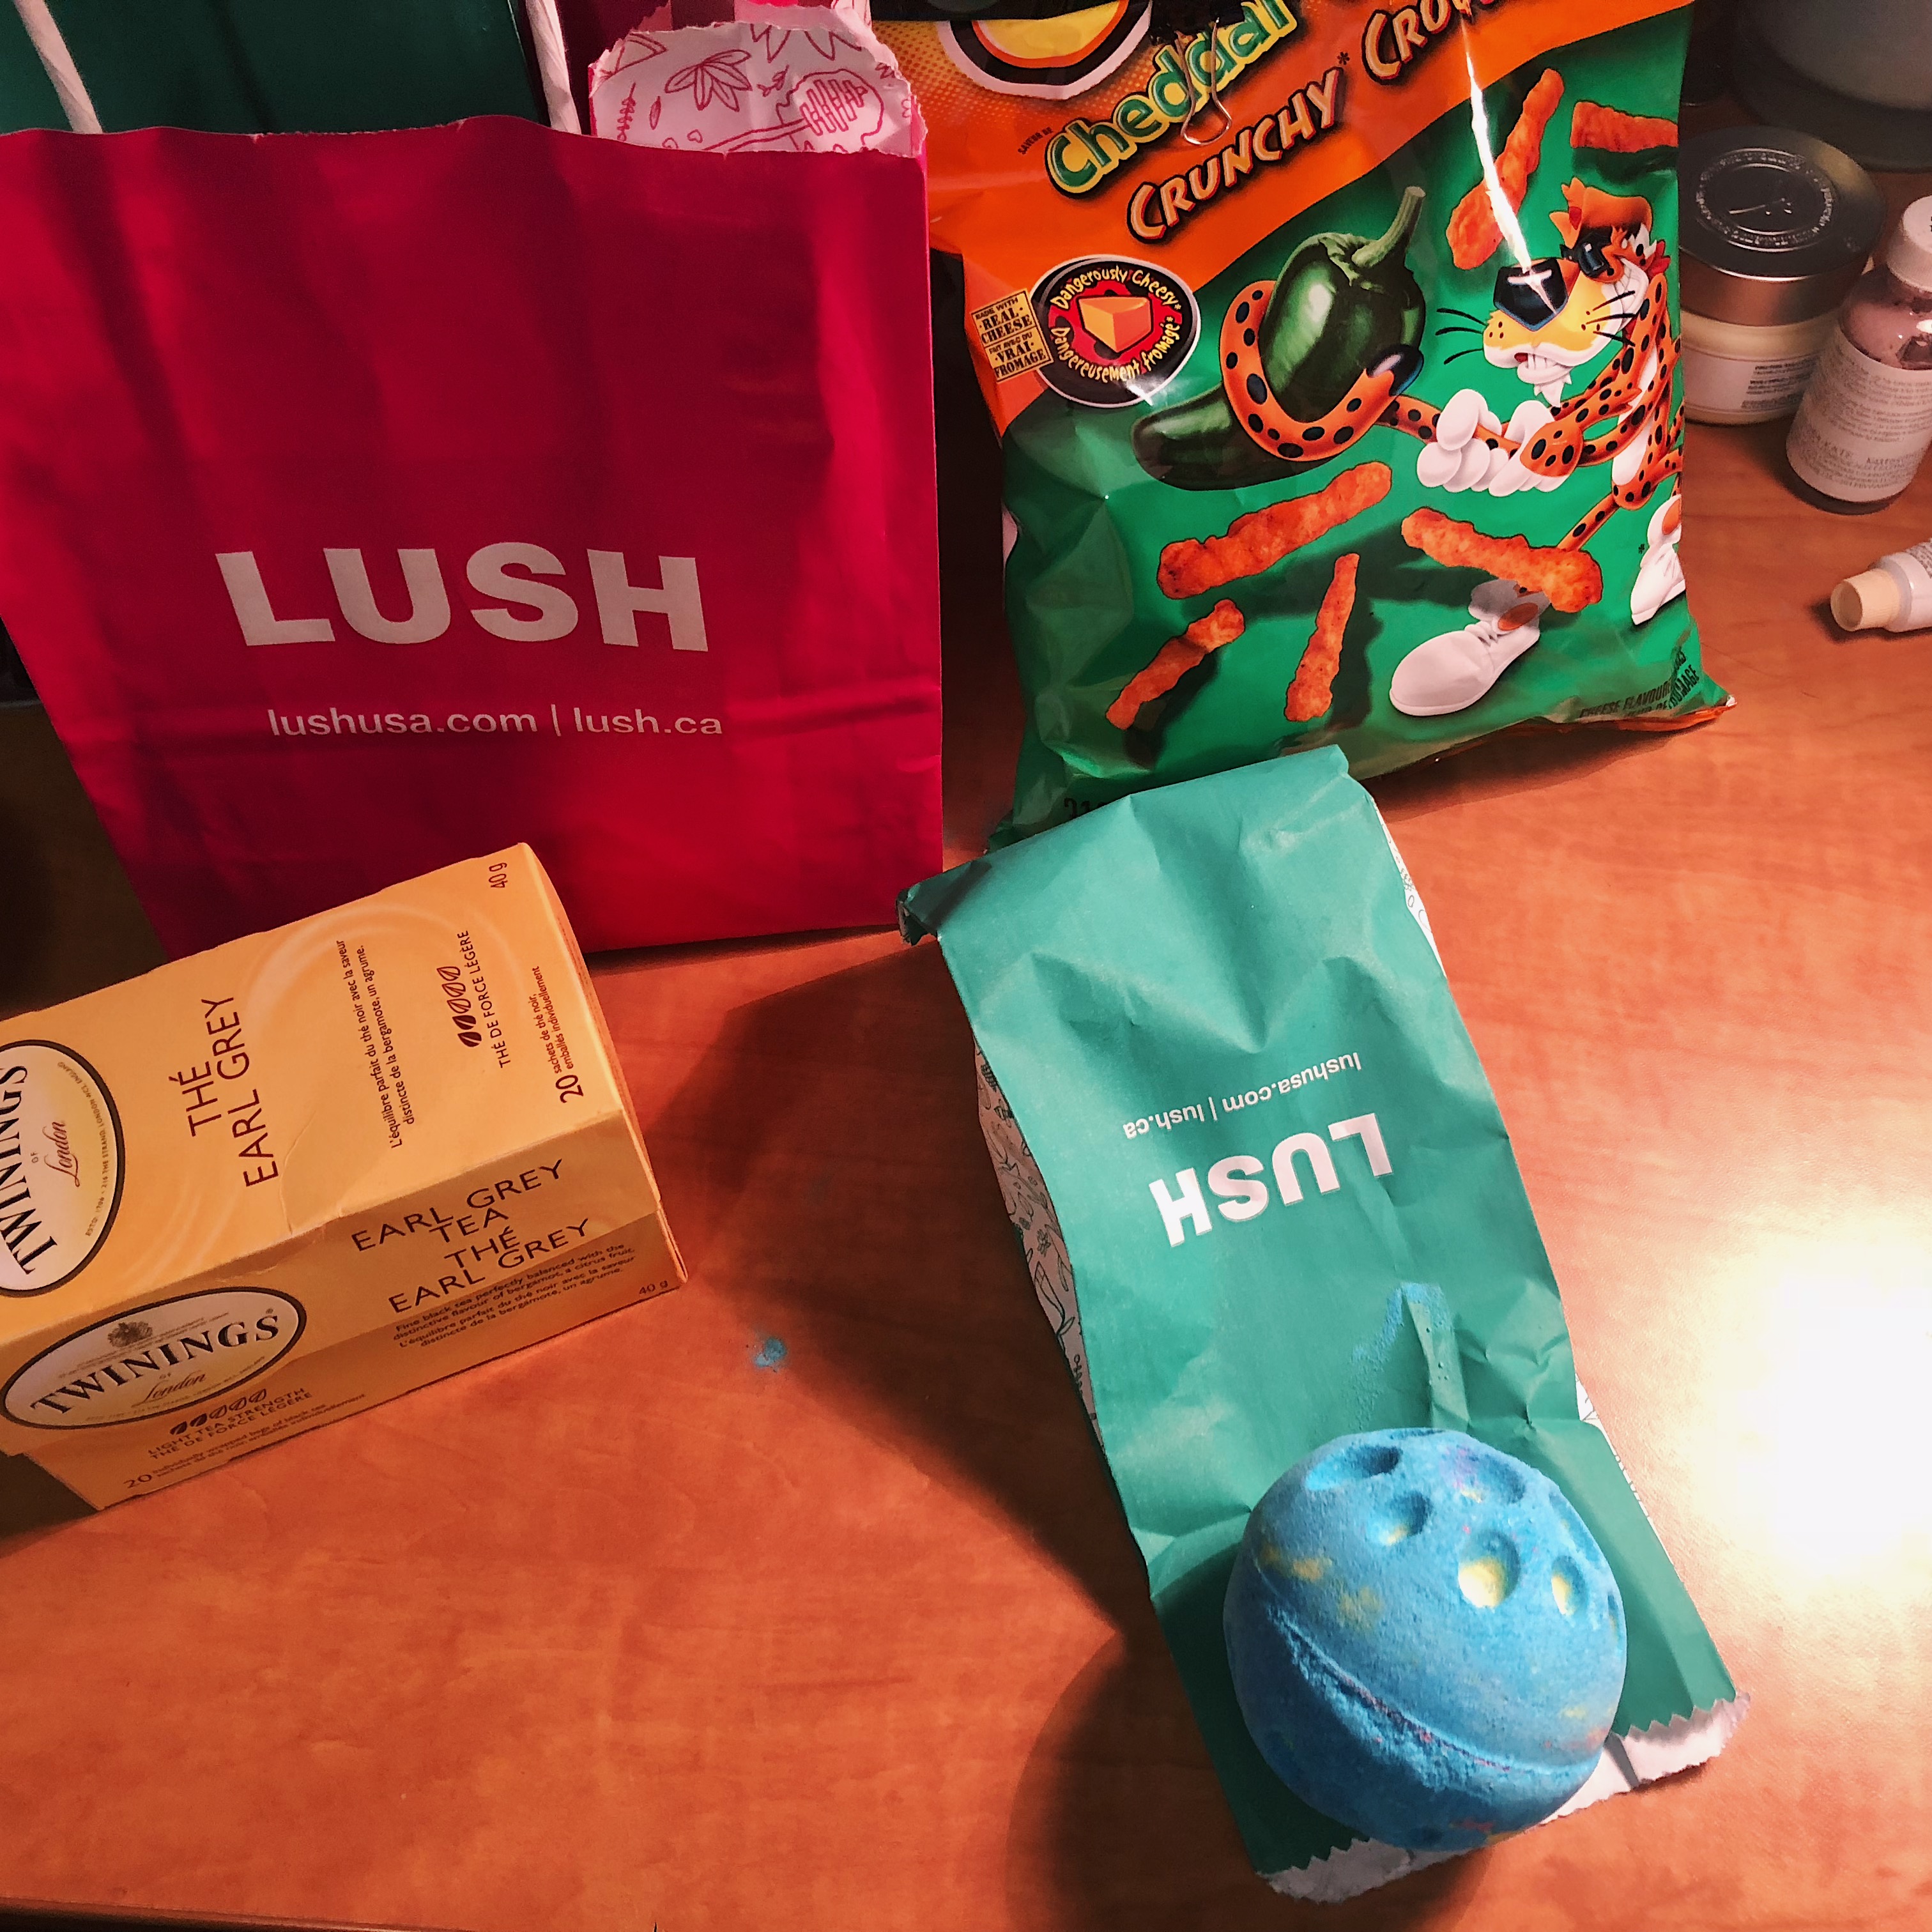 Reading week essentials- lush bath products, tea, and snacks